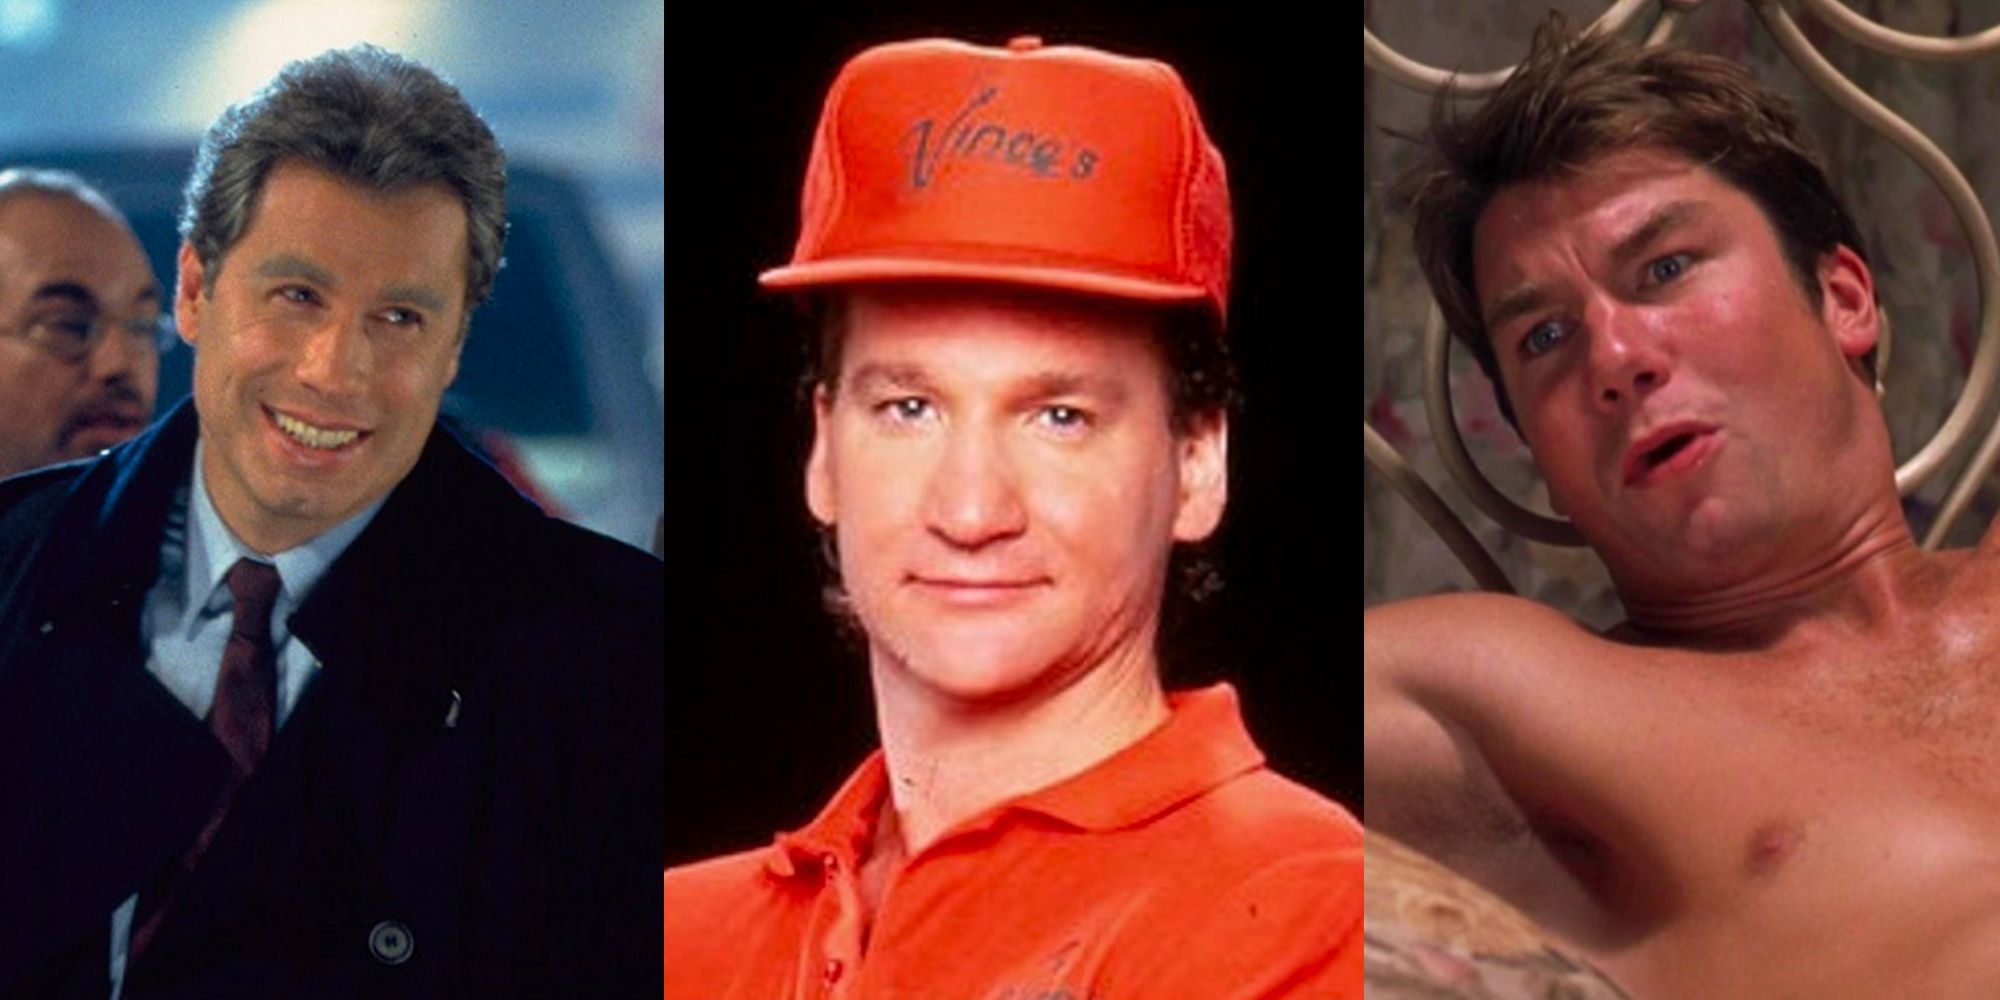 Bill Maher in several roles -Primary Colors, Pizza Man, Tomcat